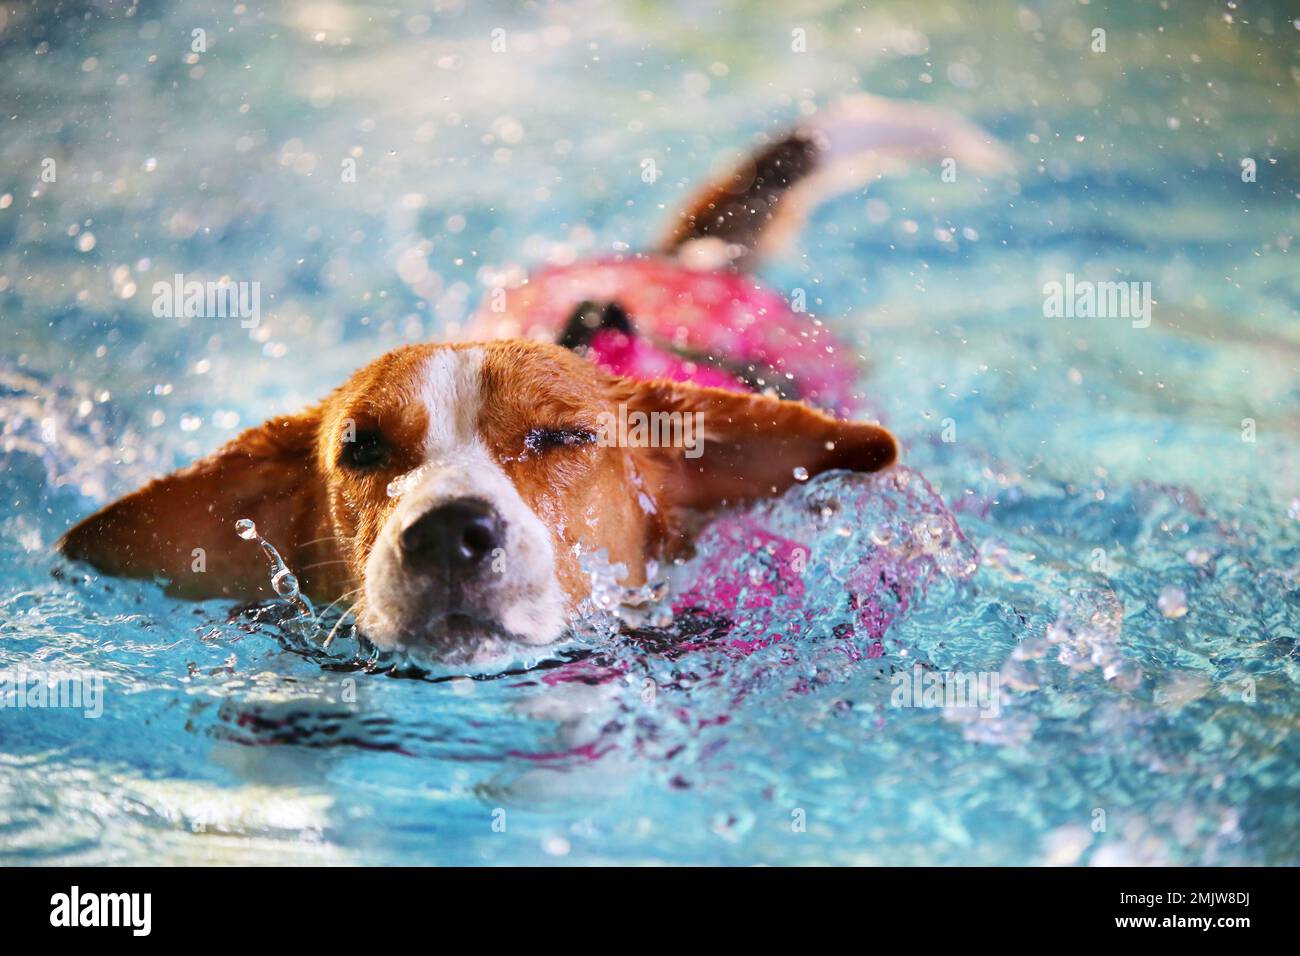 Beagle wearing life jacket and swimming in the pool. Dog swimming. Dog making splashed water in the pool. Stock Photo